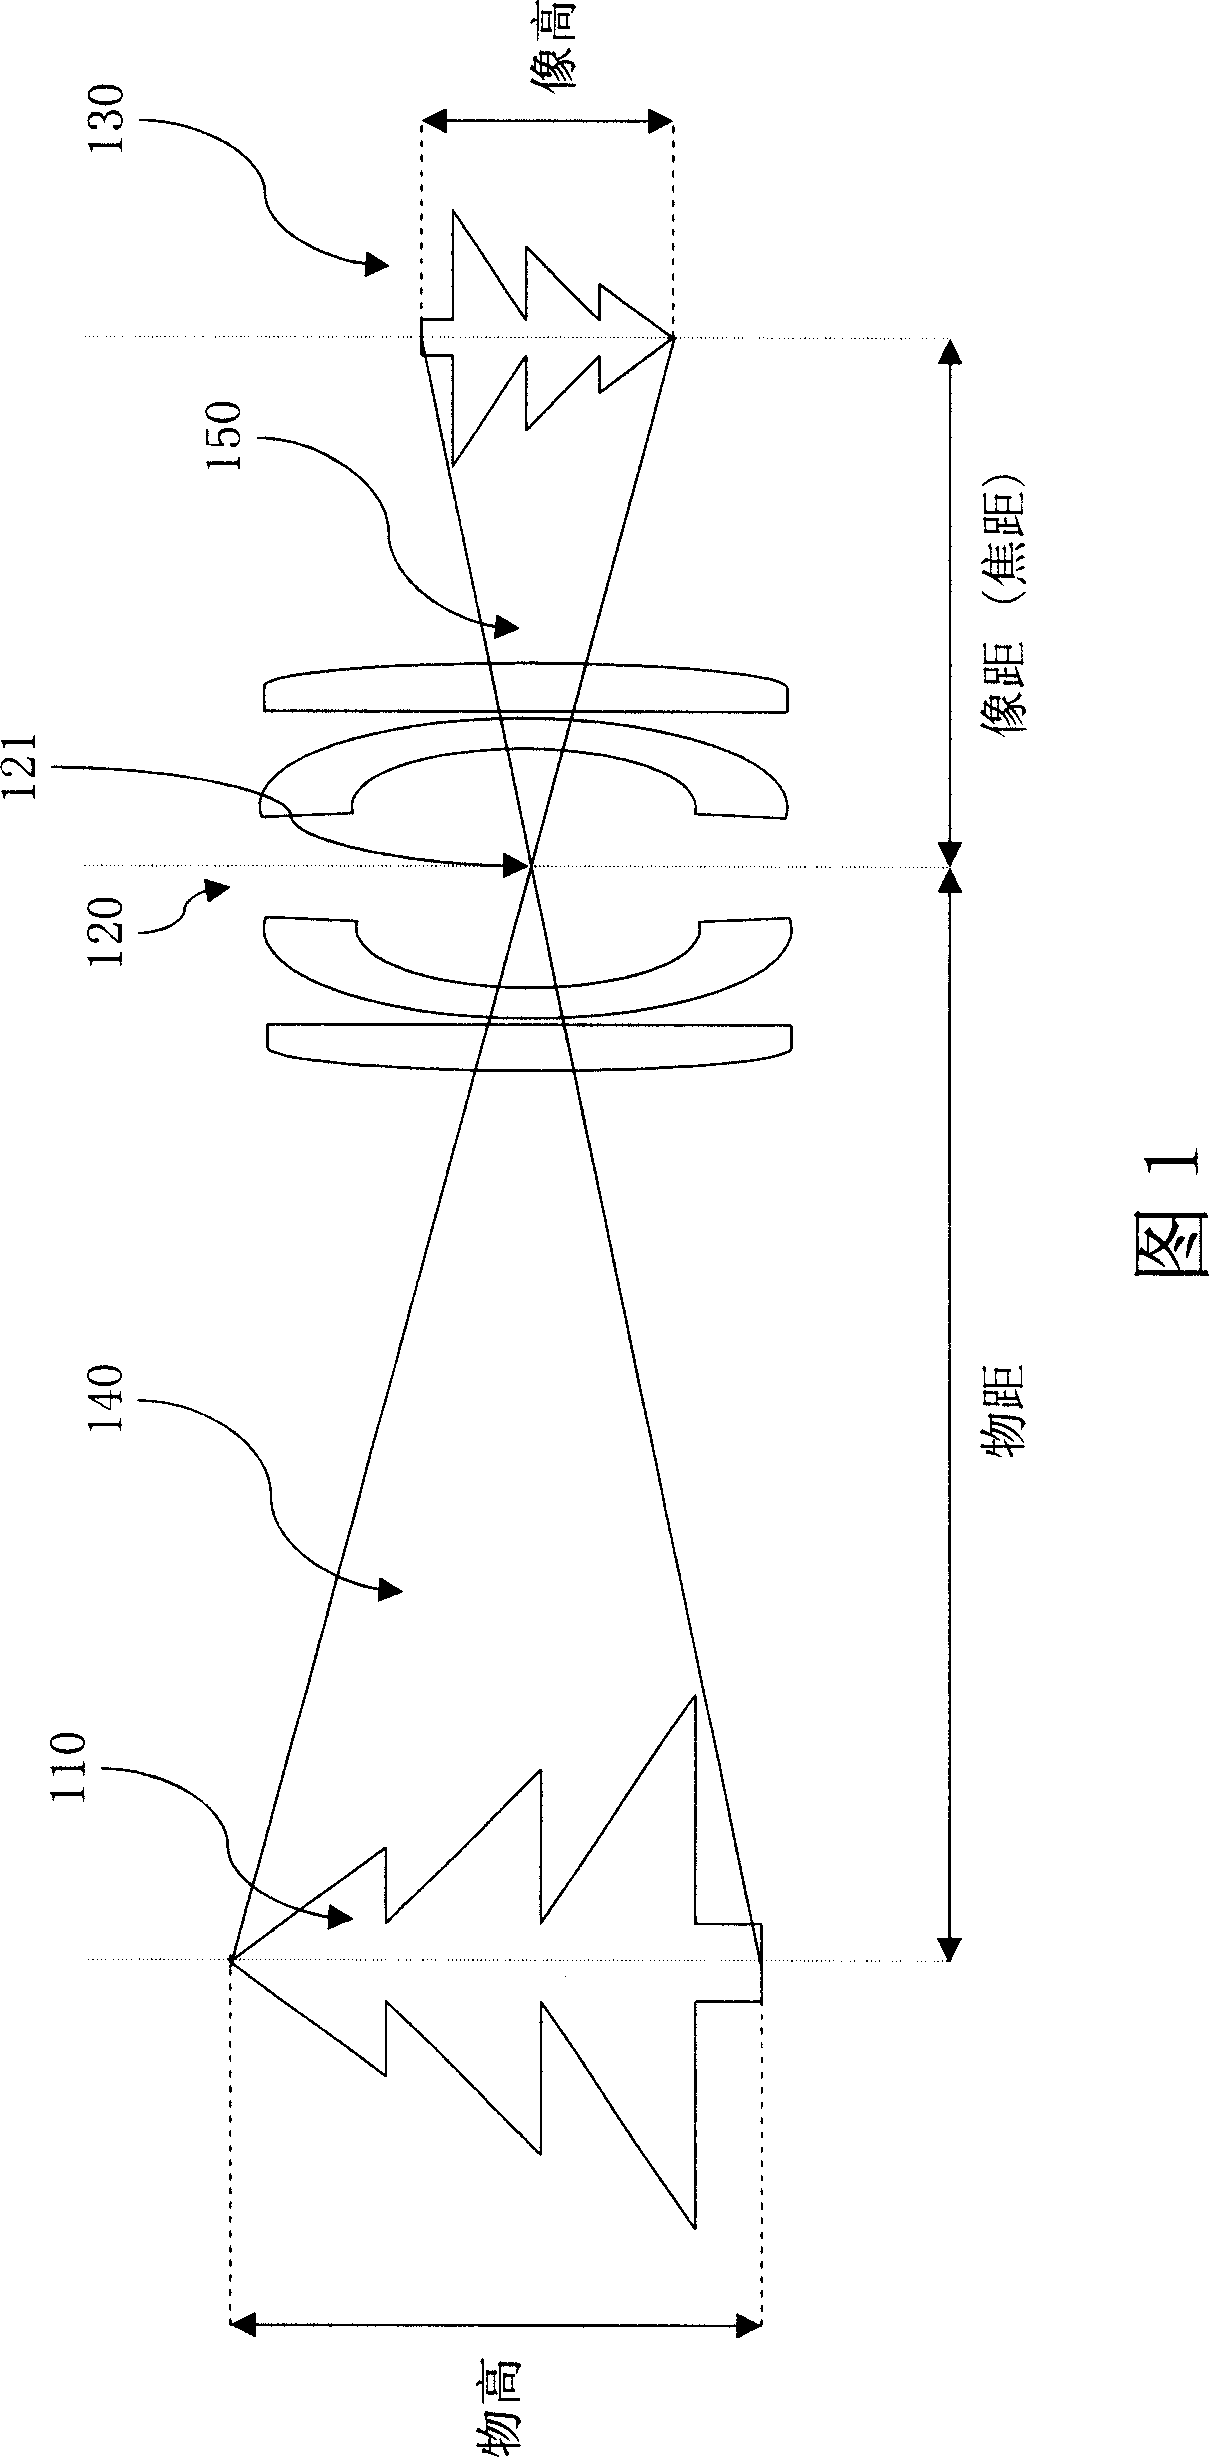 Method for calculating distance and actuate size of shot object